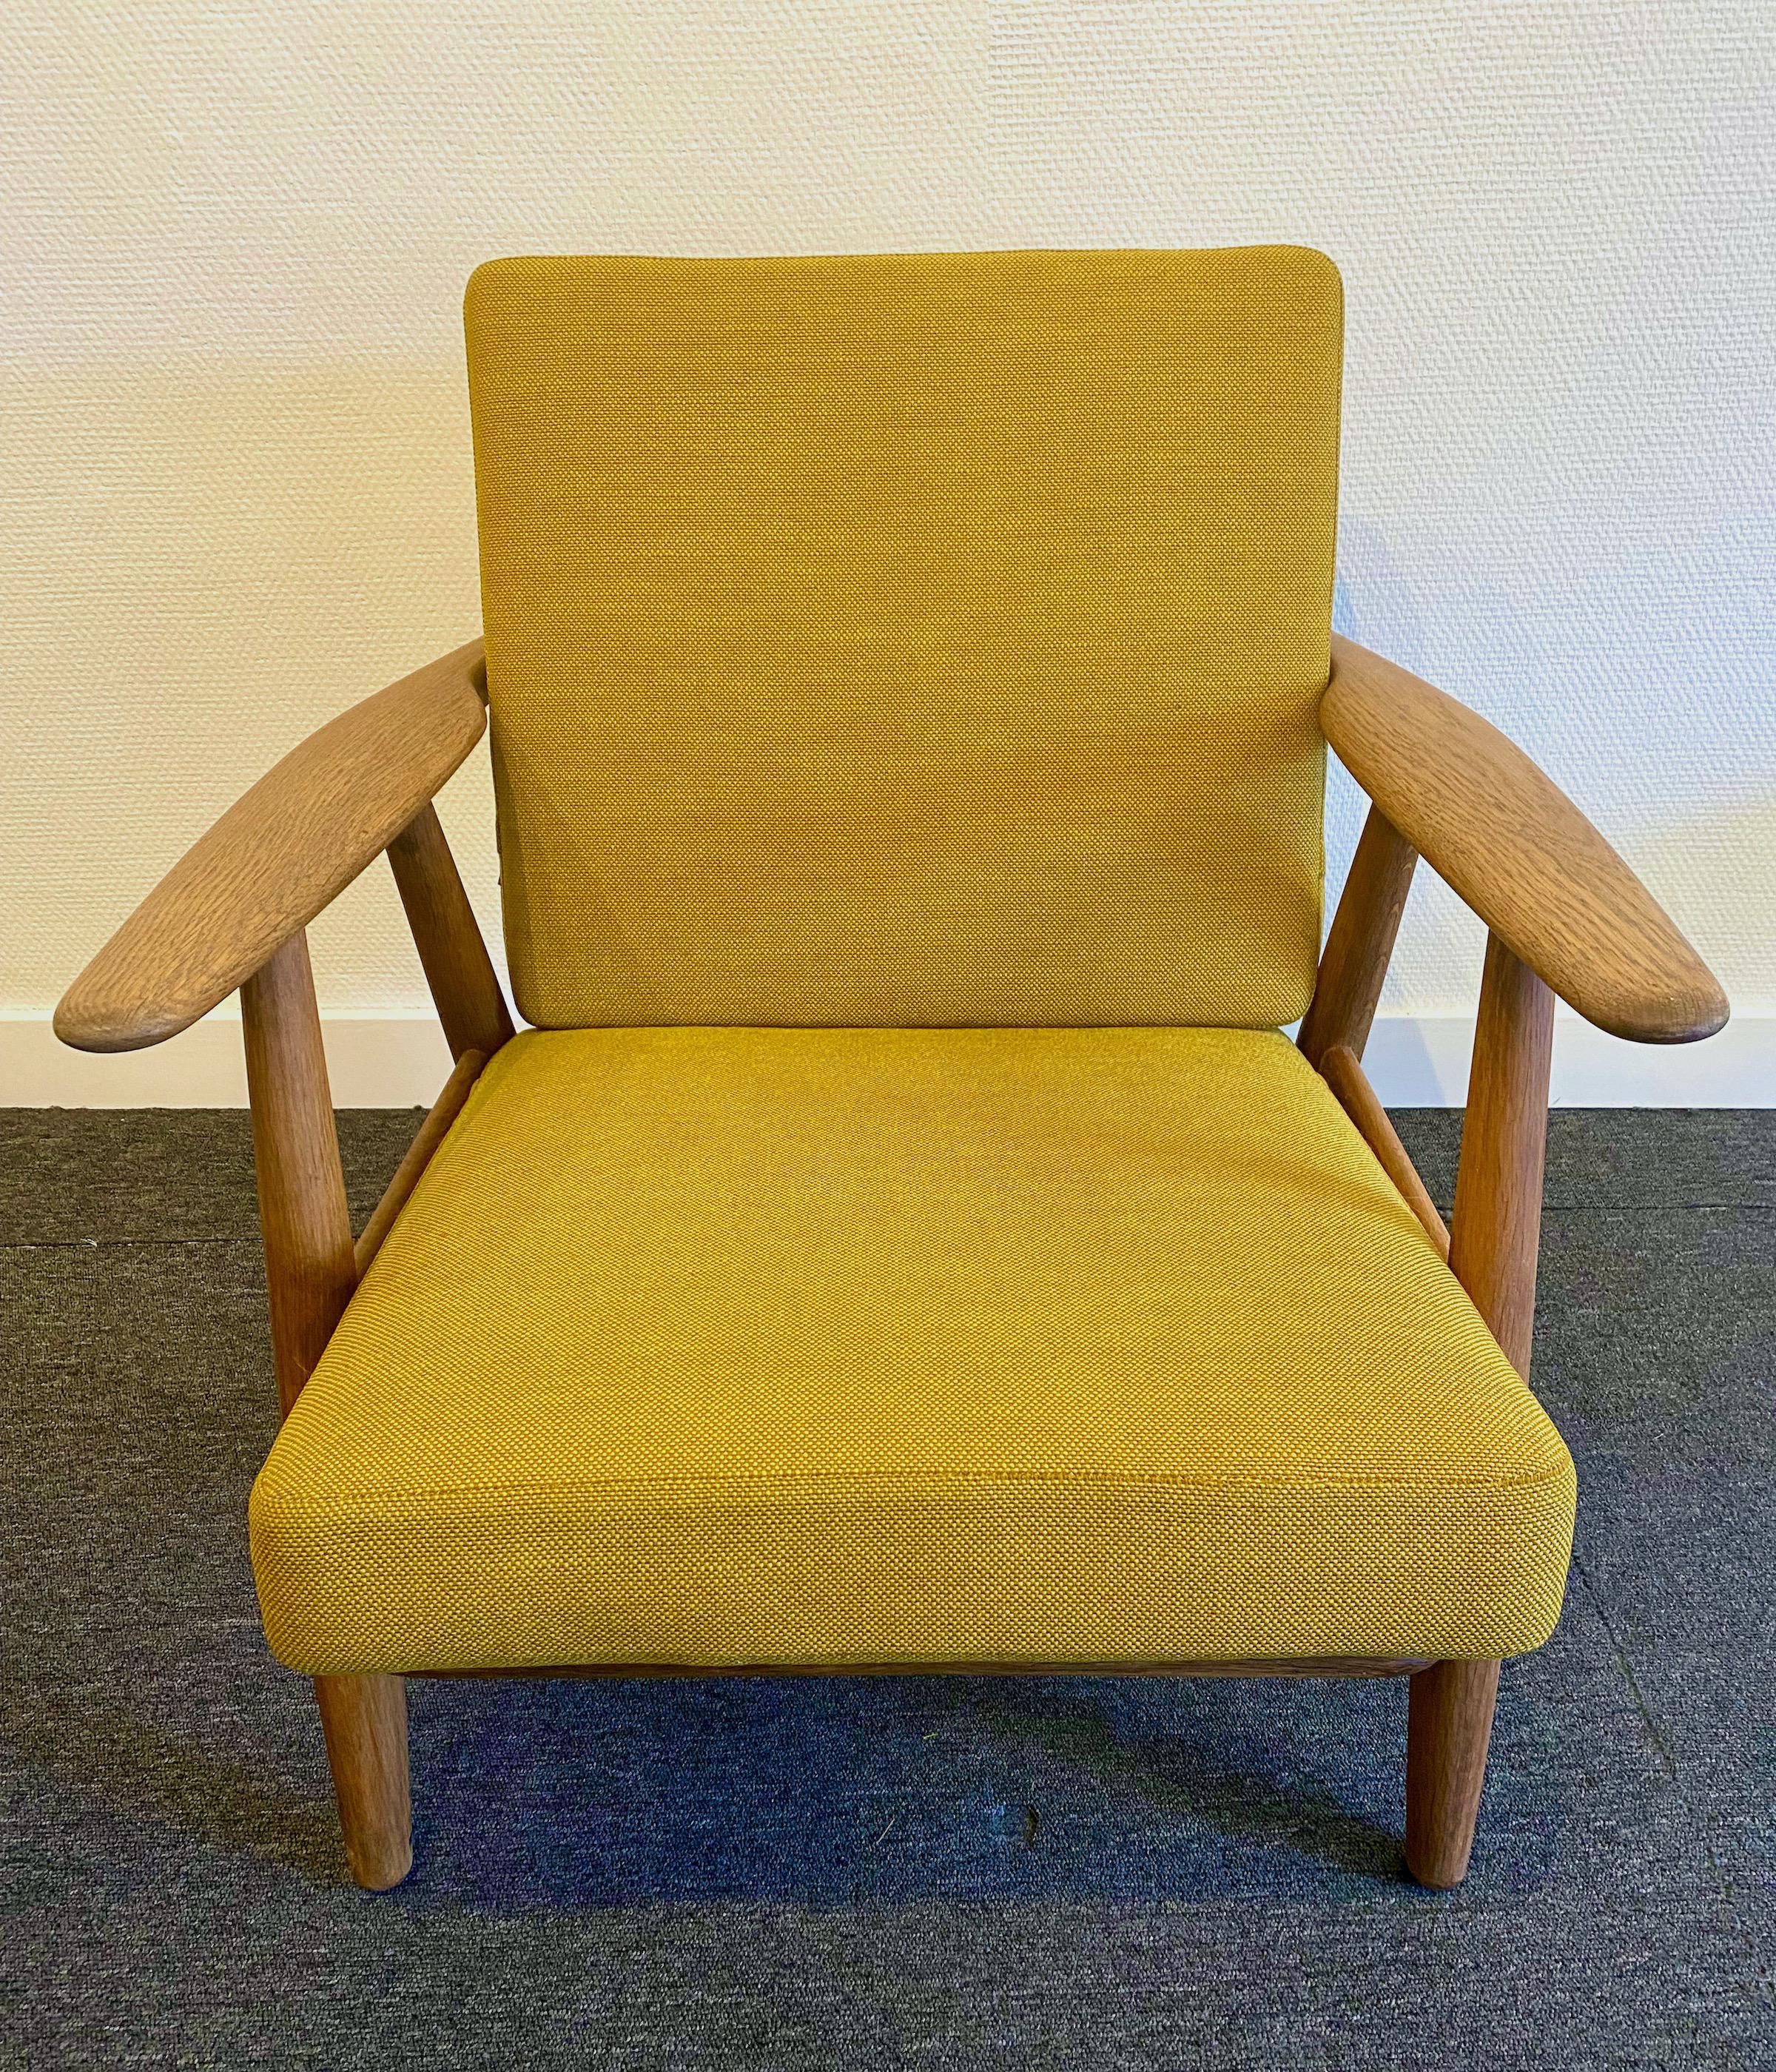 Hans Wegner´s easy chair with model number GE-240 was designed in 1954 for Getama and given the nick name 